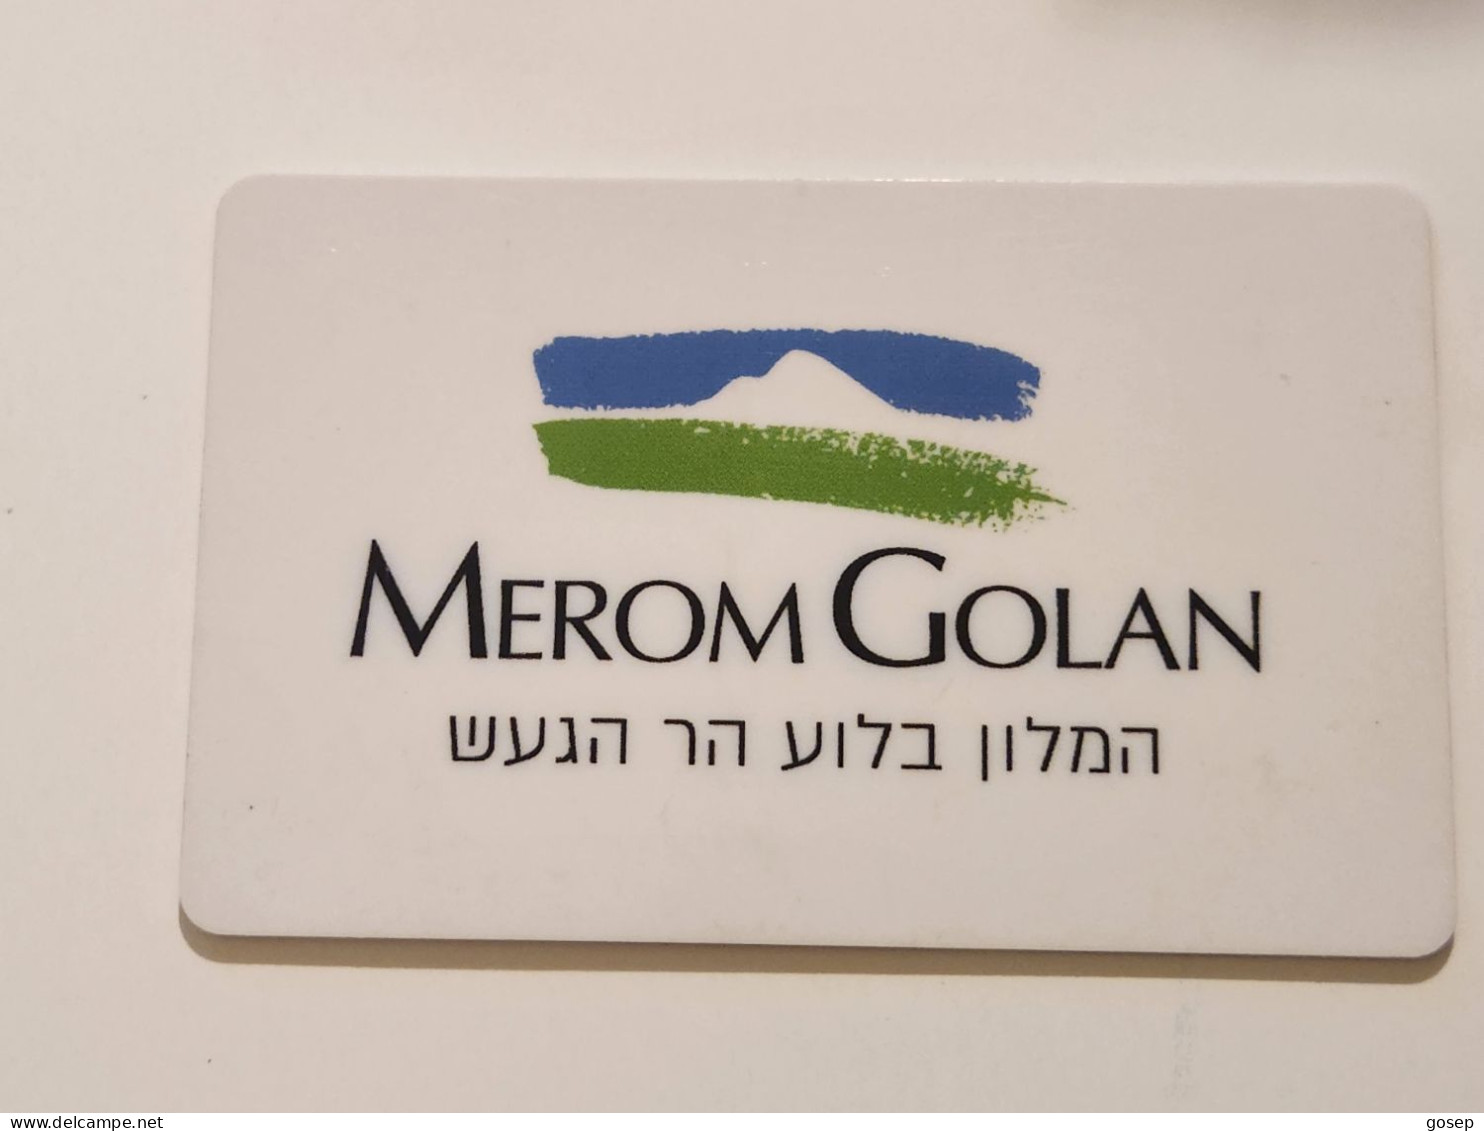 ISRAEL-MEROM GOLAN-The Hotel Is In The Crater Of The Volcano-HOTAL-KEY CARD-(1075)(?)GOOD CARD - Hotelkarten